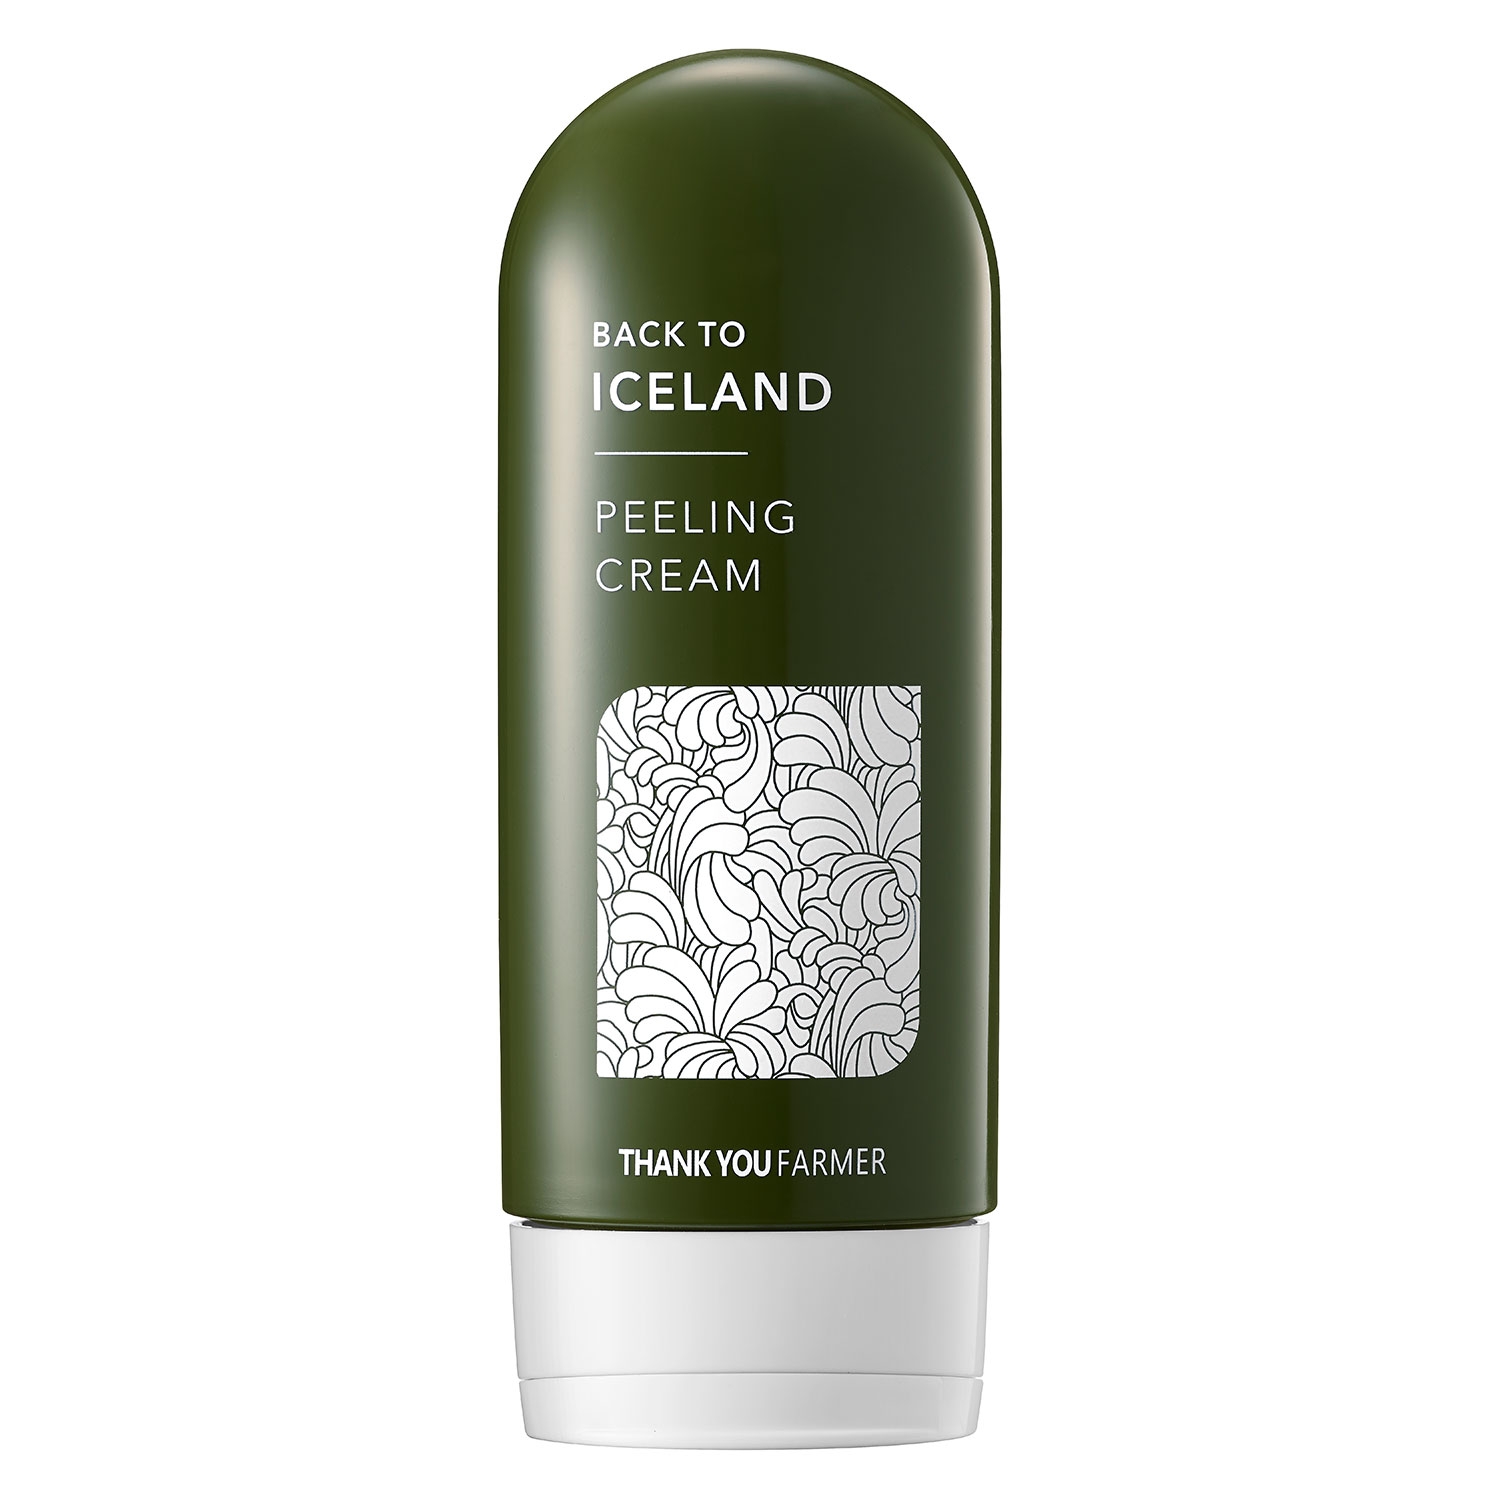 Product image from THANK YOU FARMER - Back To Iceland Peeling Cream